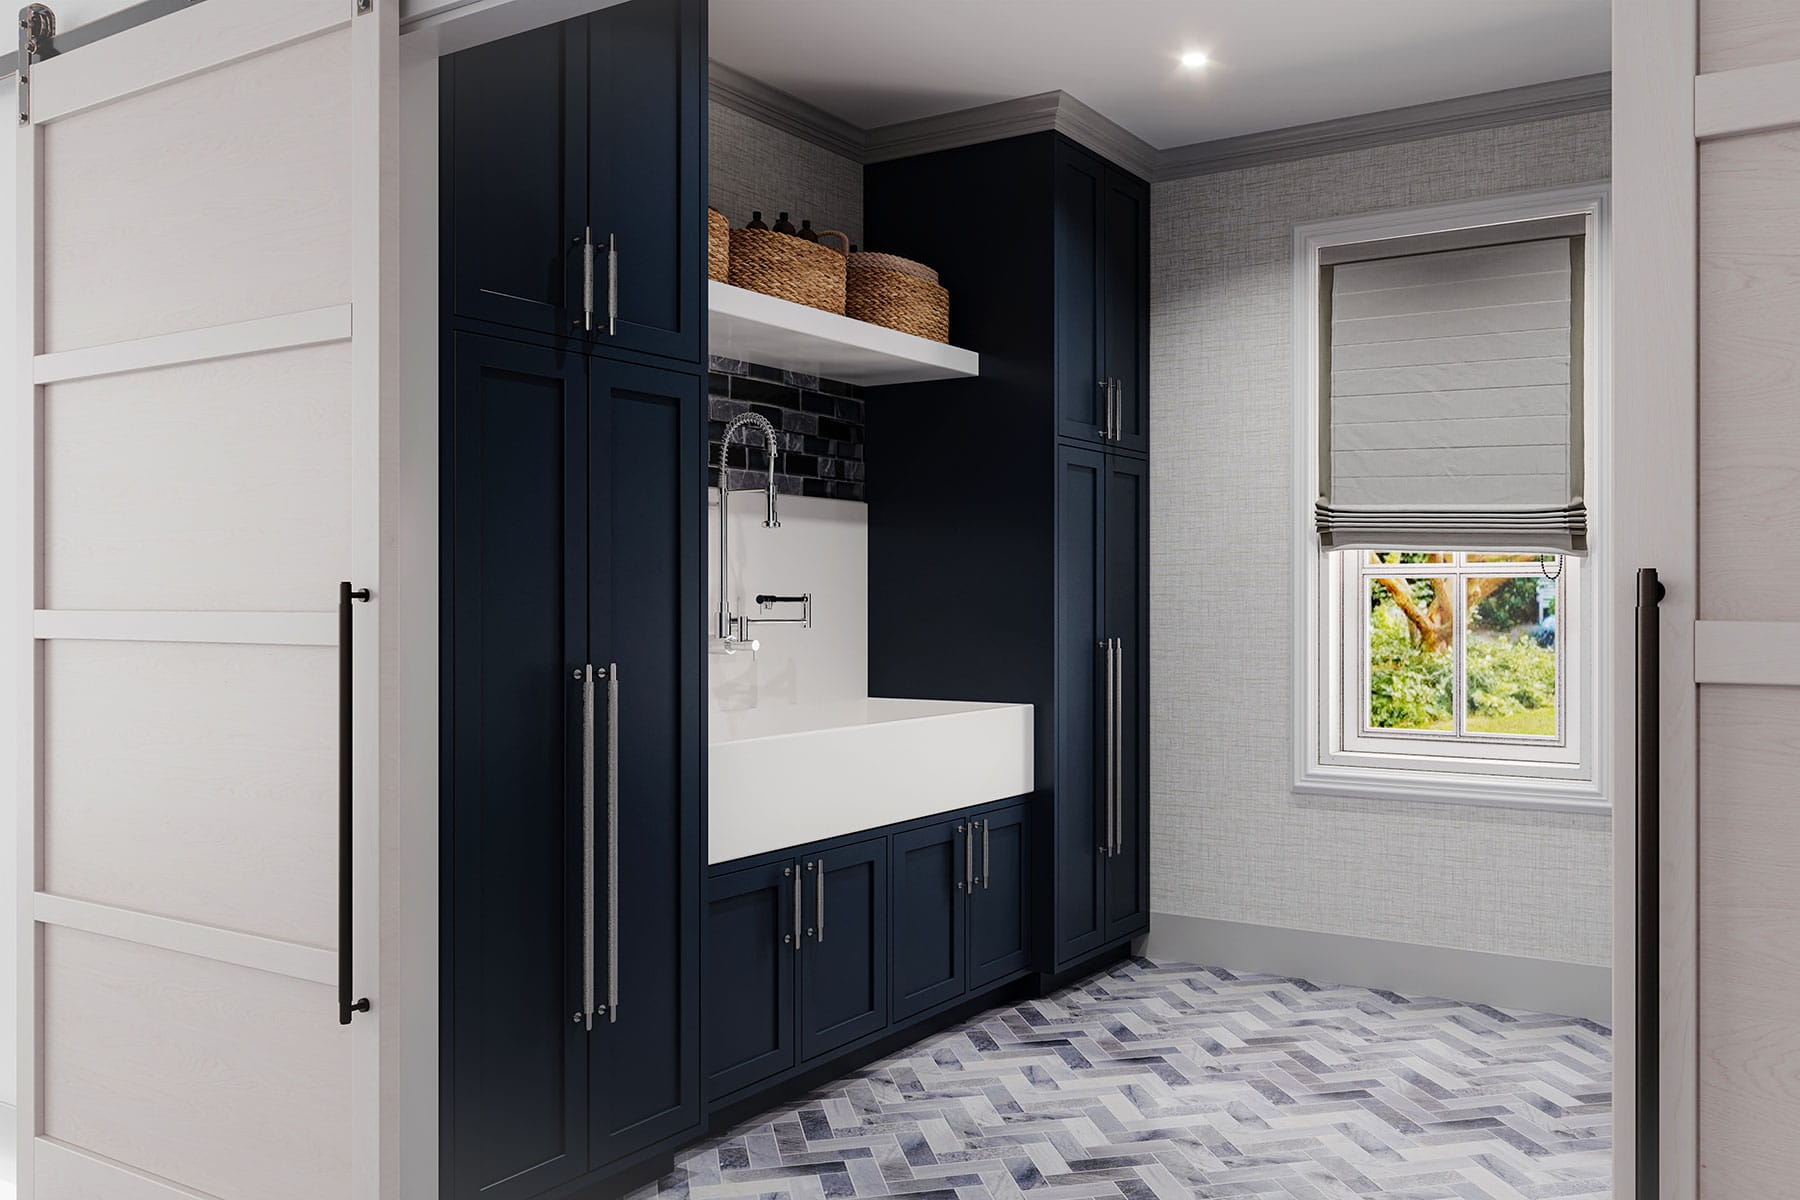 Custom Laundry Room Organization Systems, Cabinets & Accessories